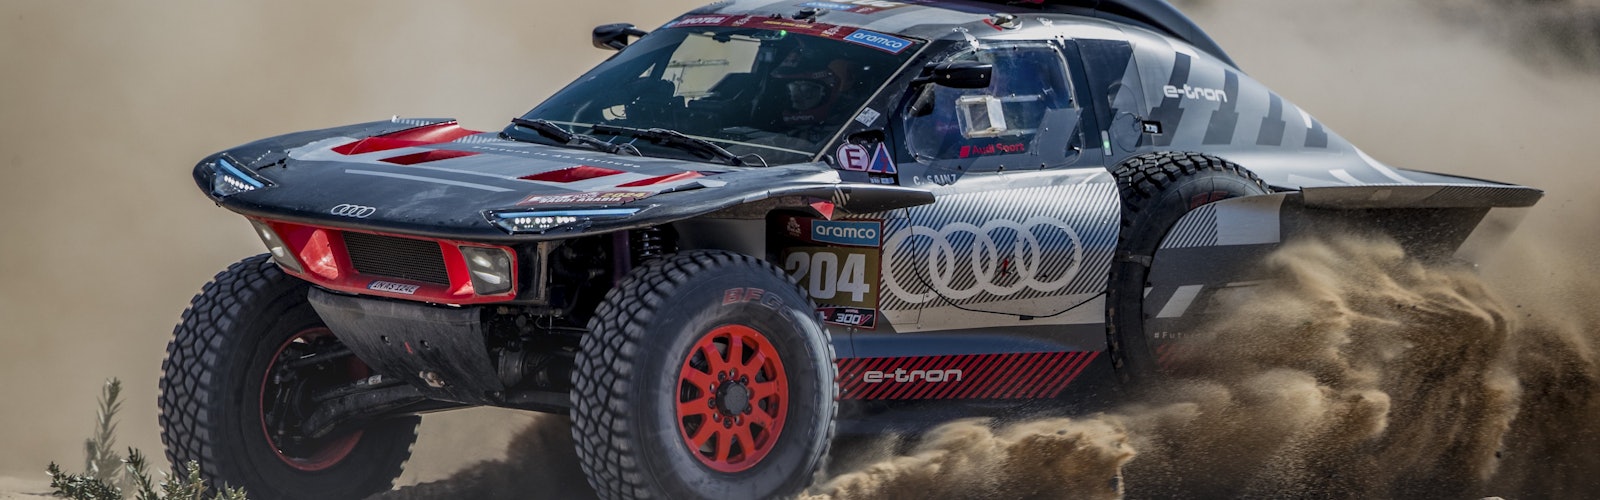 LOEB LOSES OUT AS SAINZ CHASES DAKAR GLORY FOR AUDI